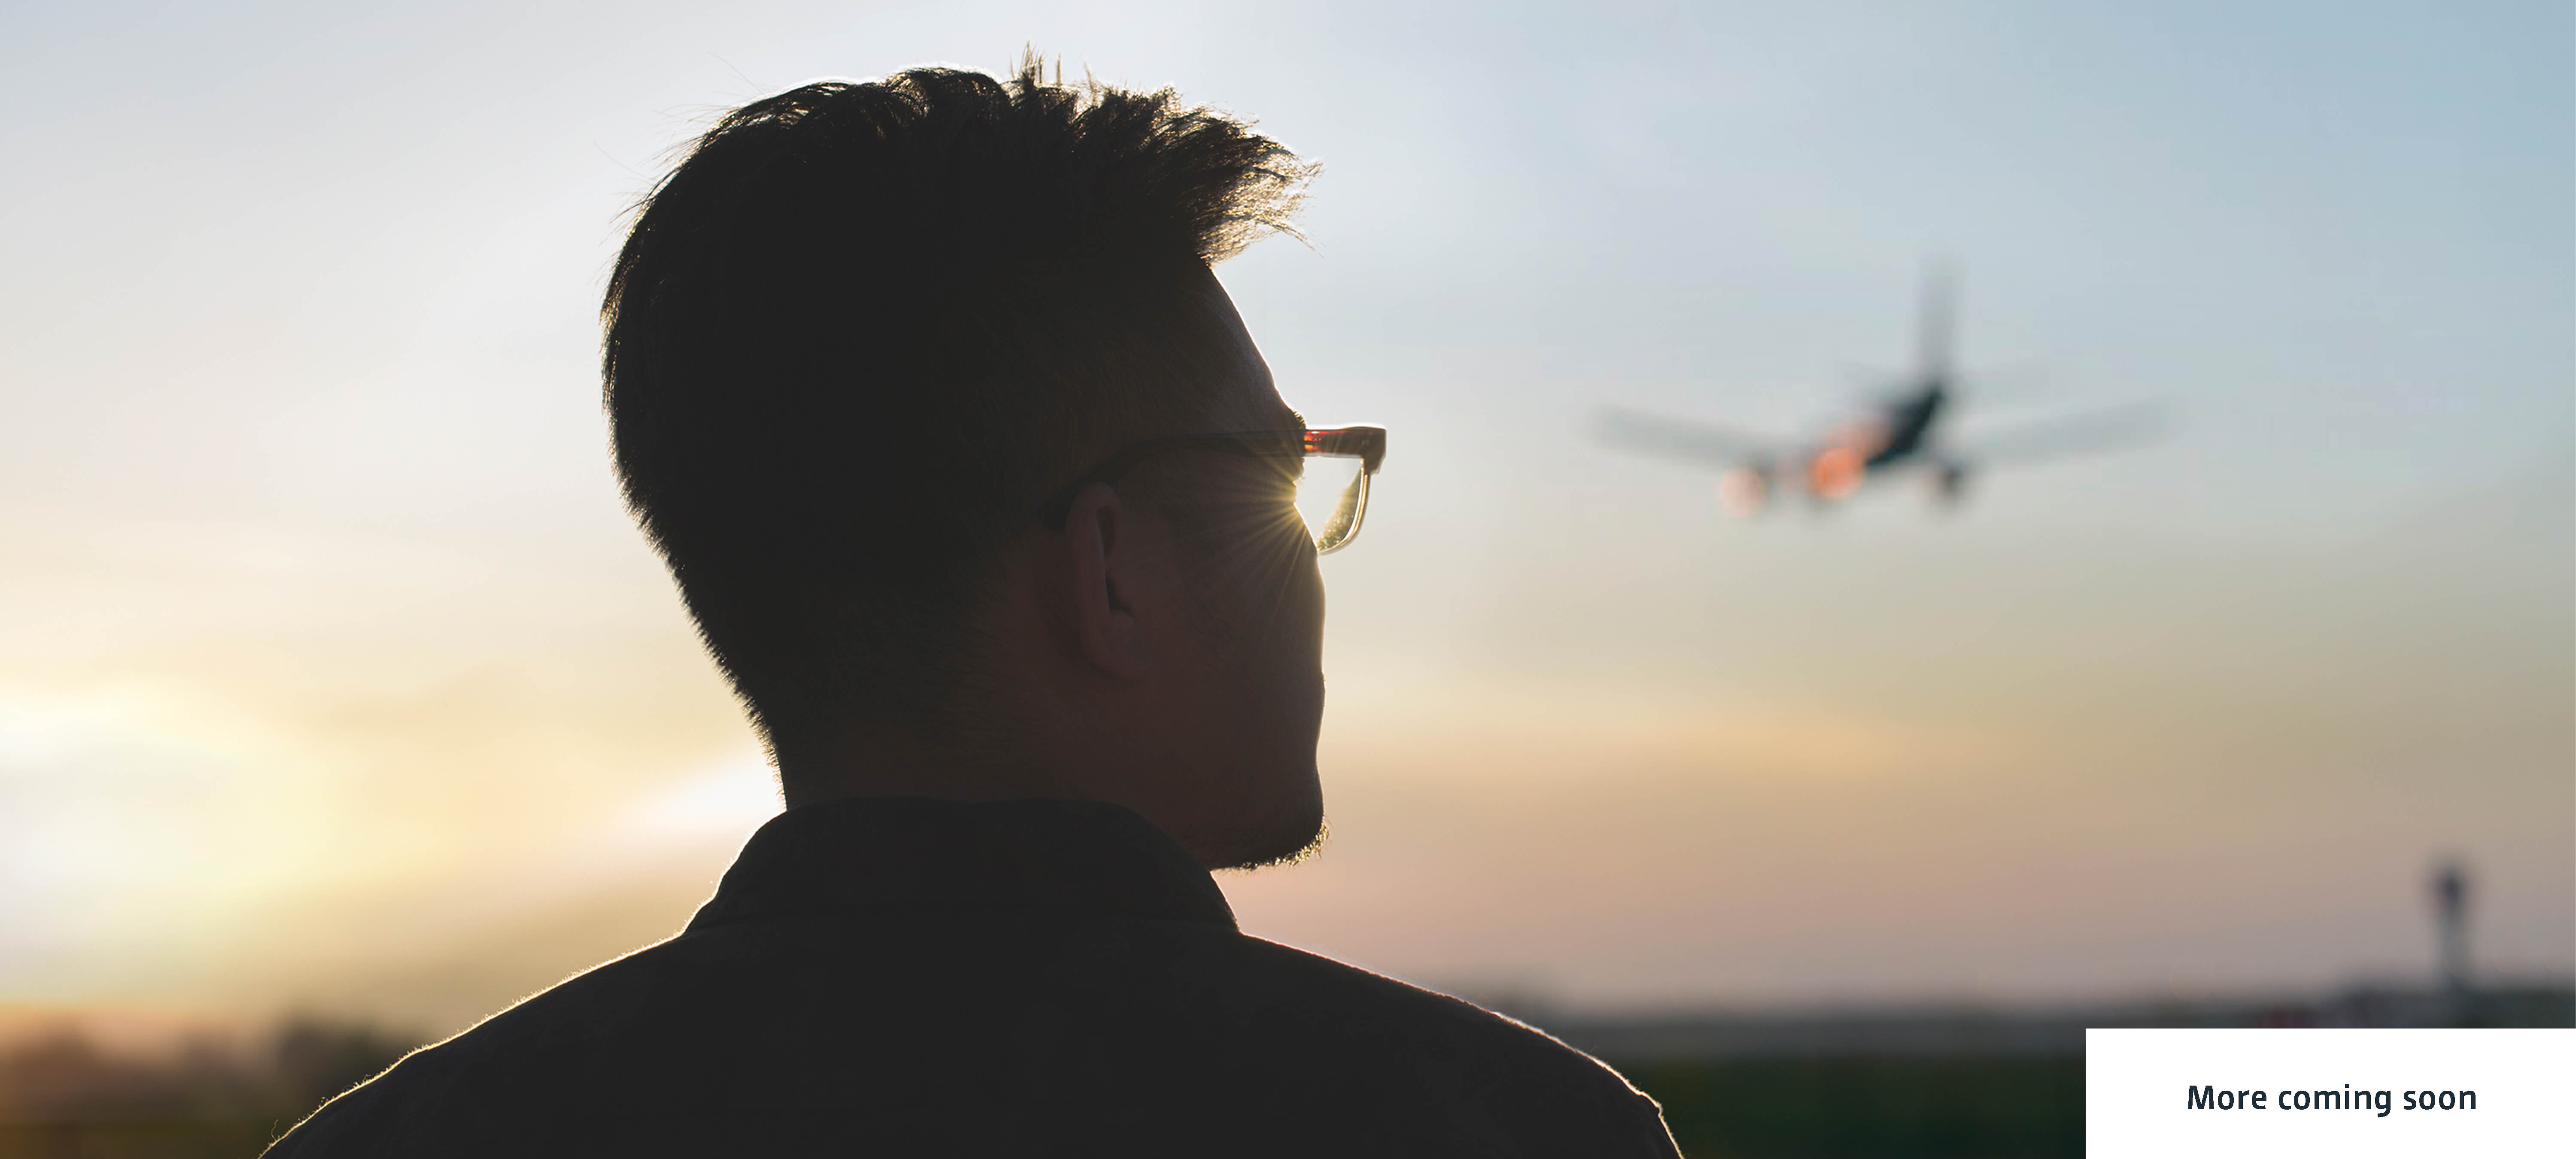 Young man looks hopefully towards the sunset, an aeroplane can be seen in the sky in the background. © Stocksy, Juan Moyano, Zheng Long 